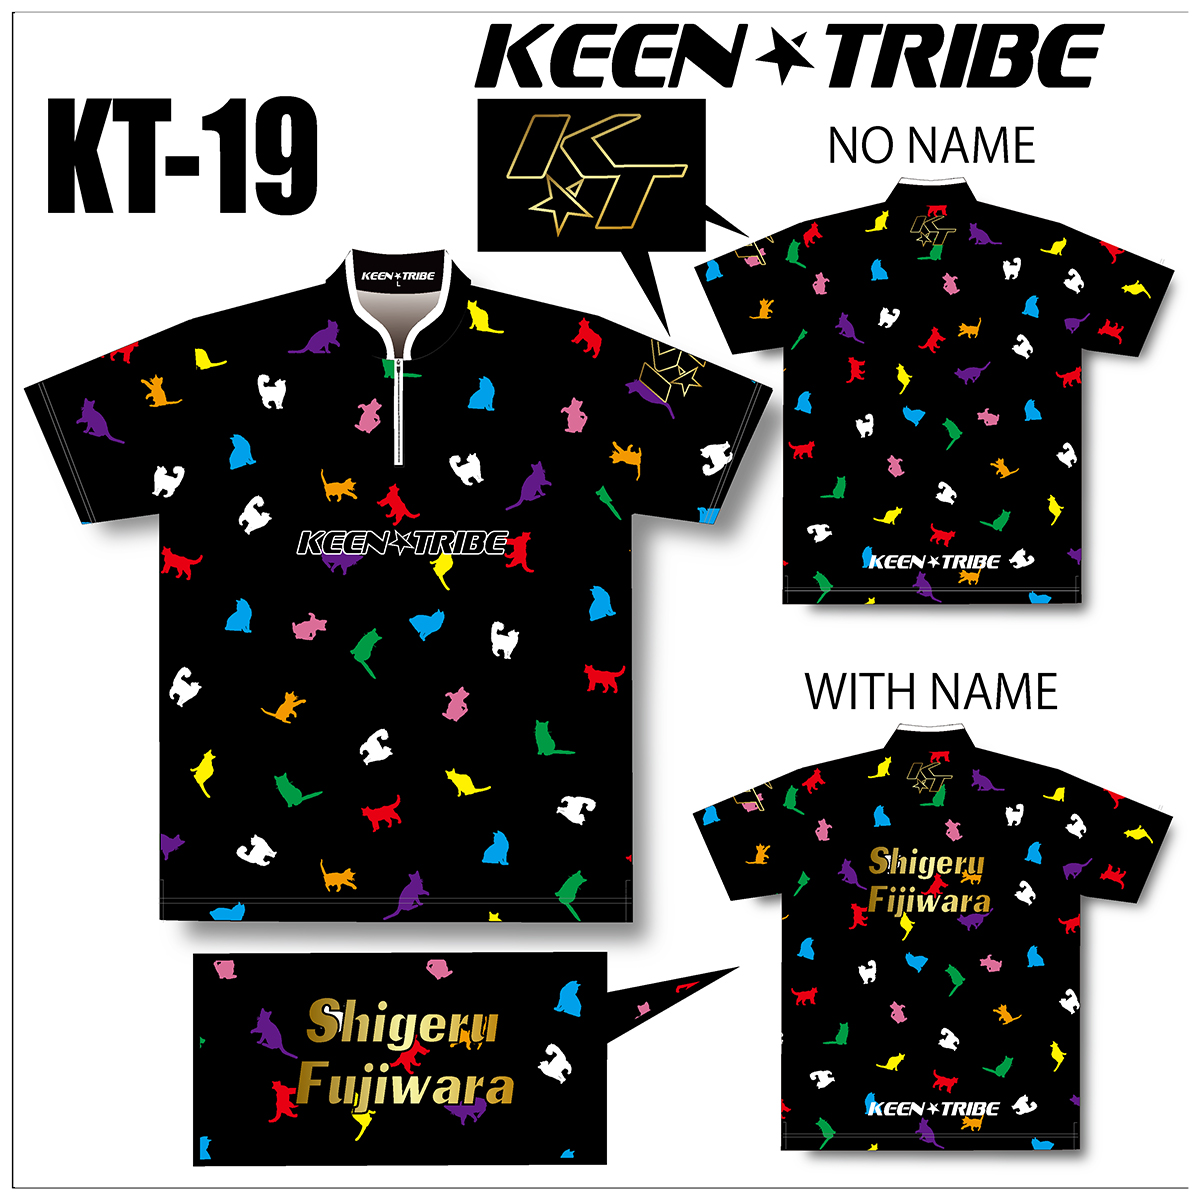 KEEN ★ TRIBE　KT-19(受注生産)